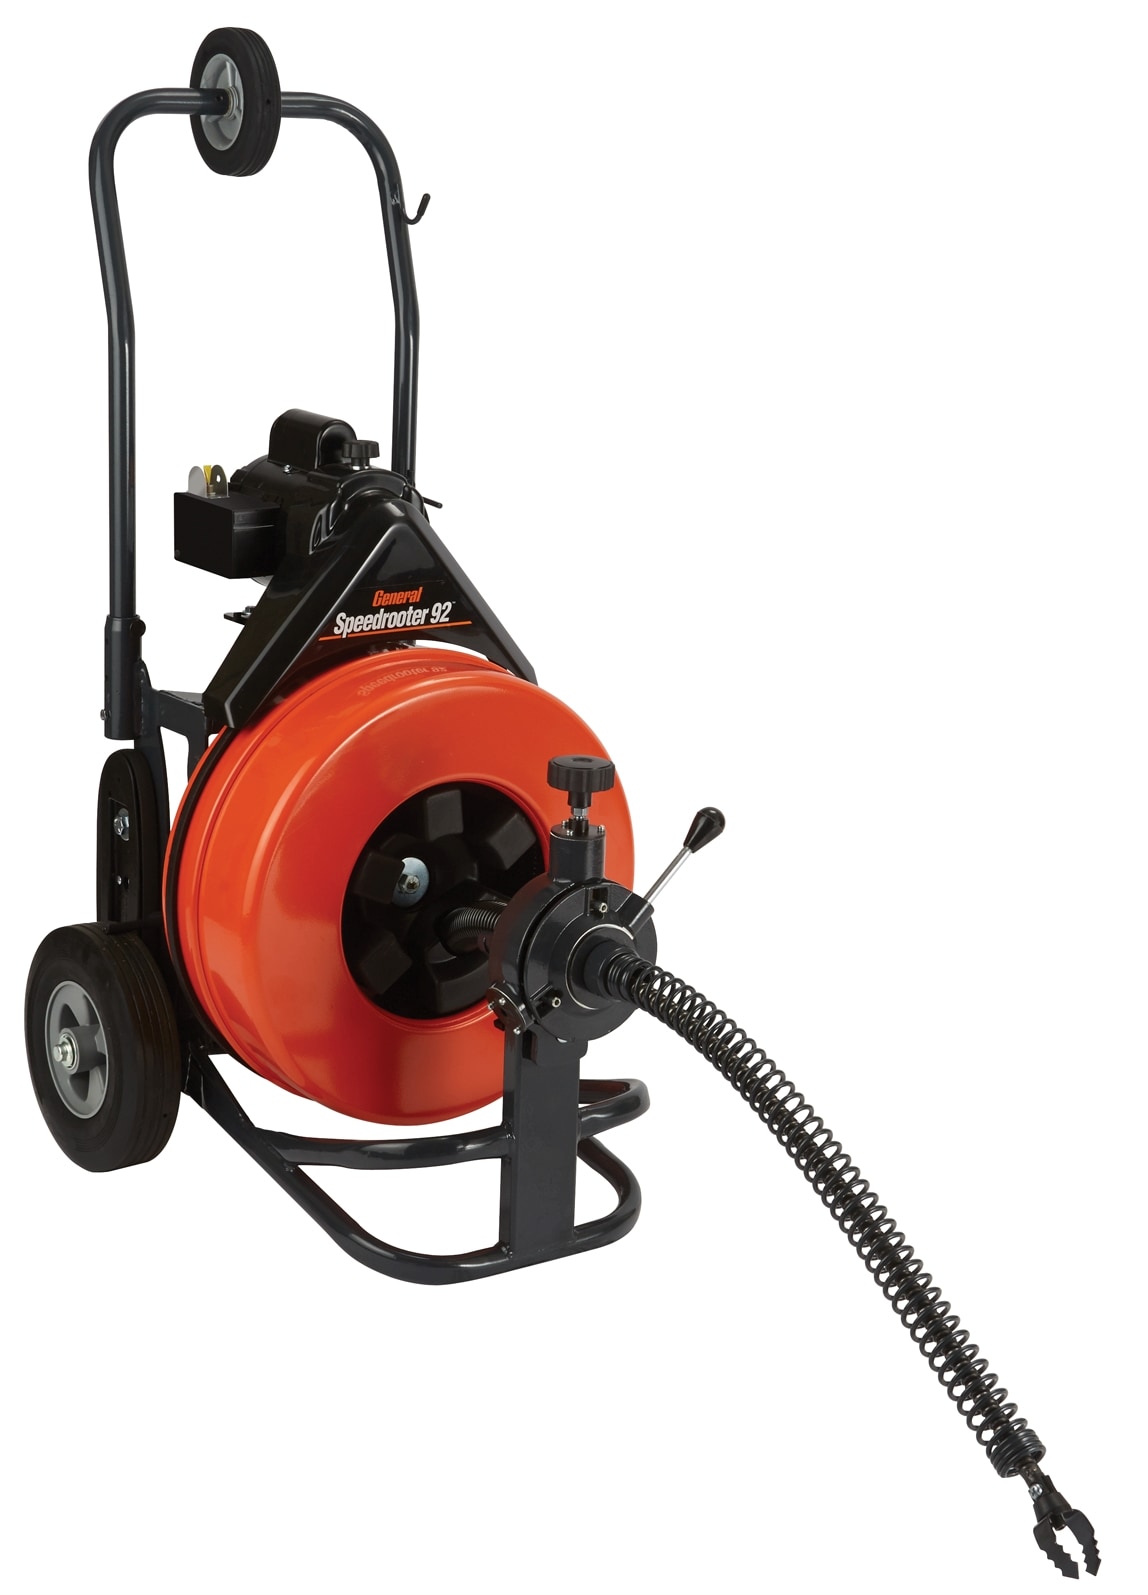 PRO Tips & Product Showcase - Drain Cleaning Machines